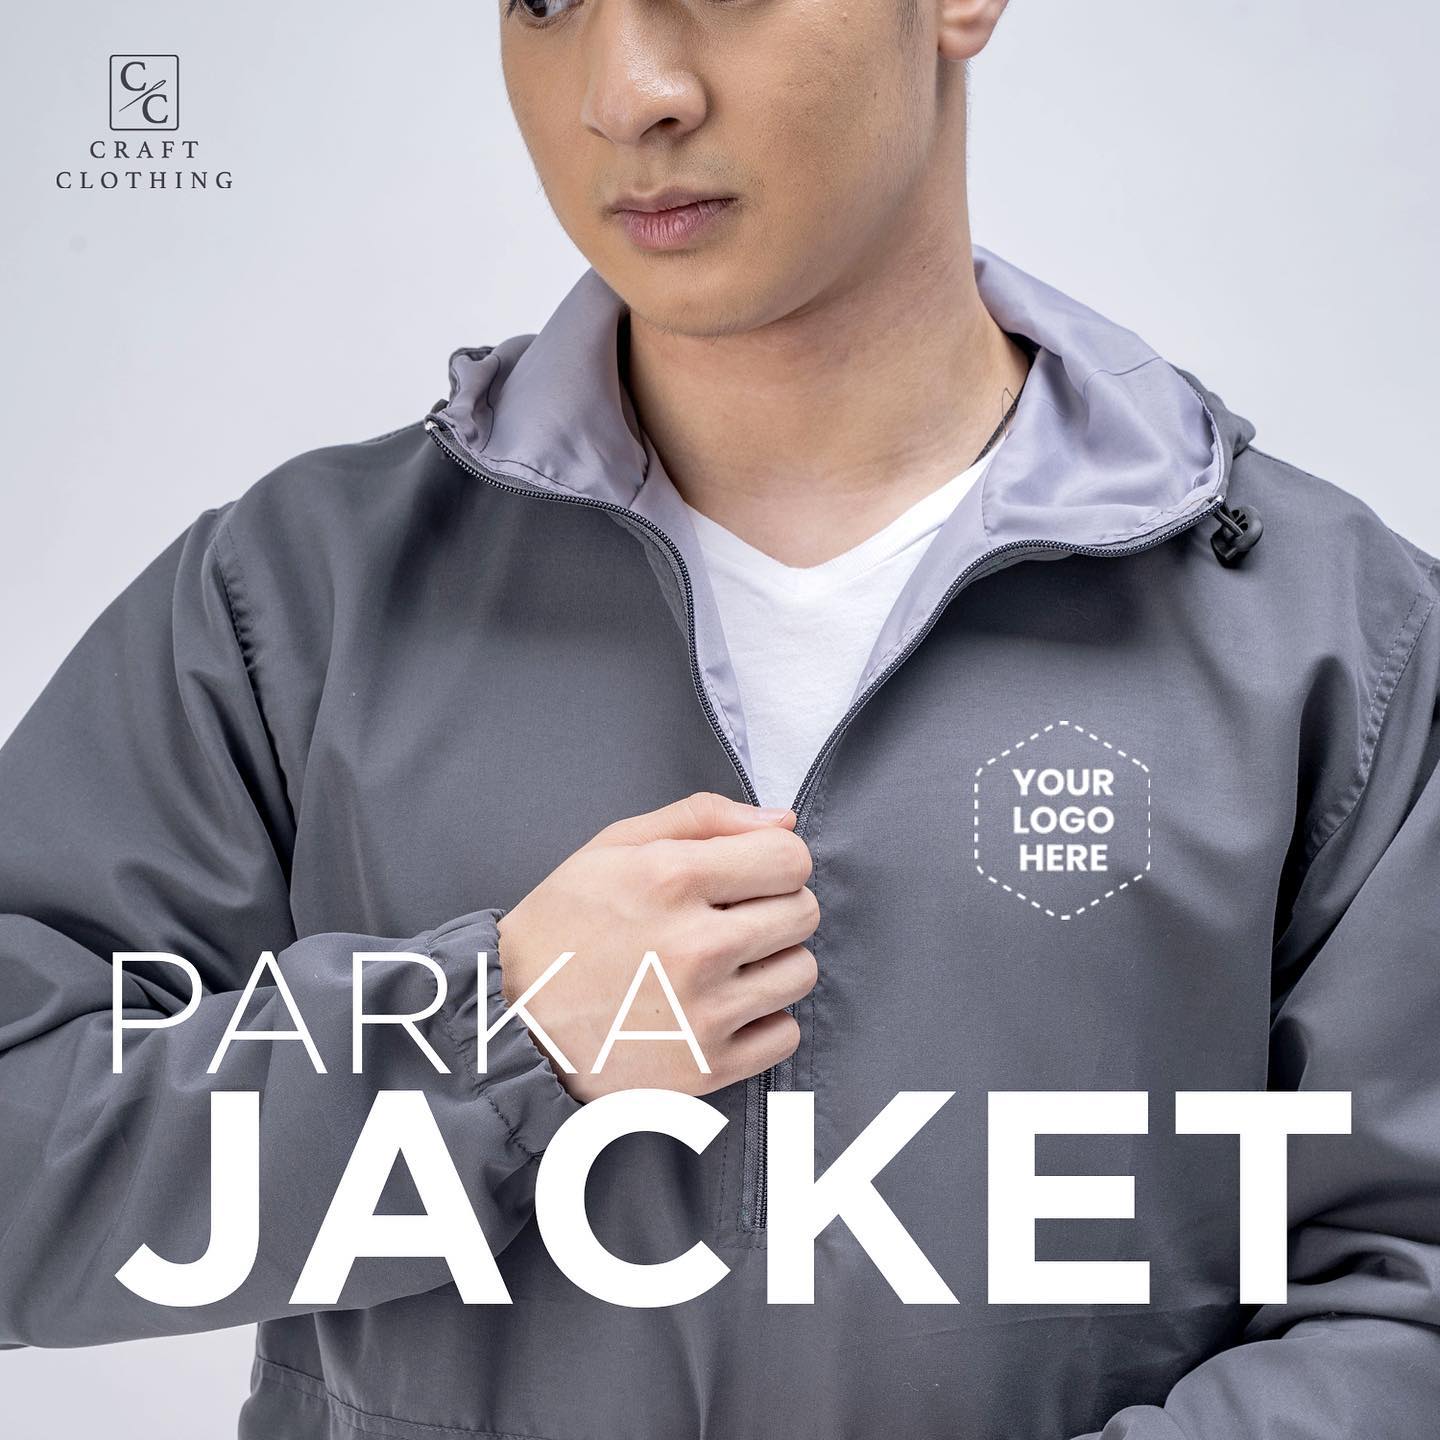 Stay warm and cozy in Parka Jackets